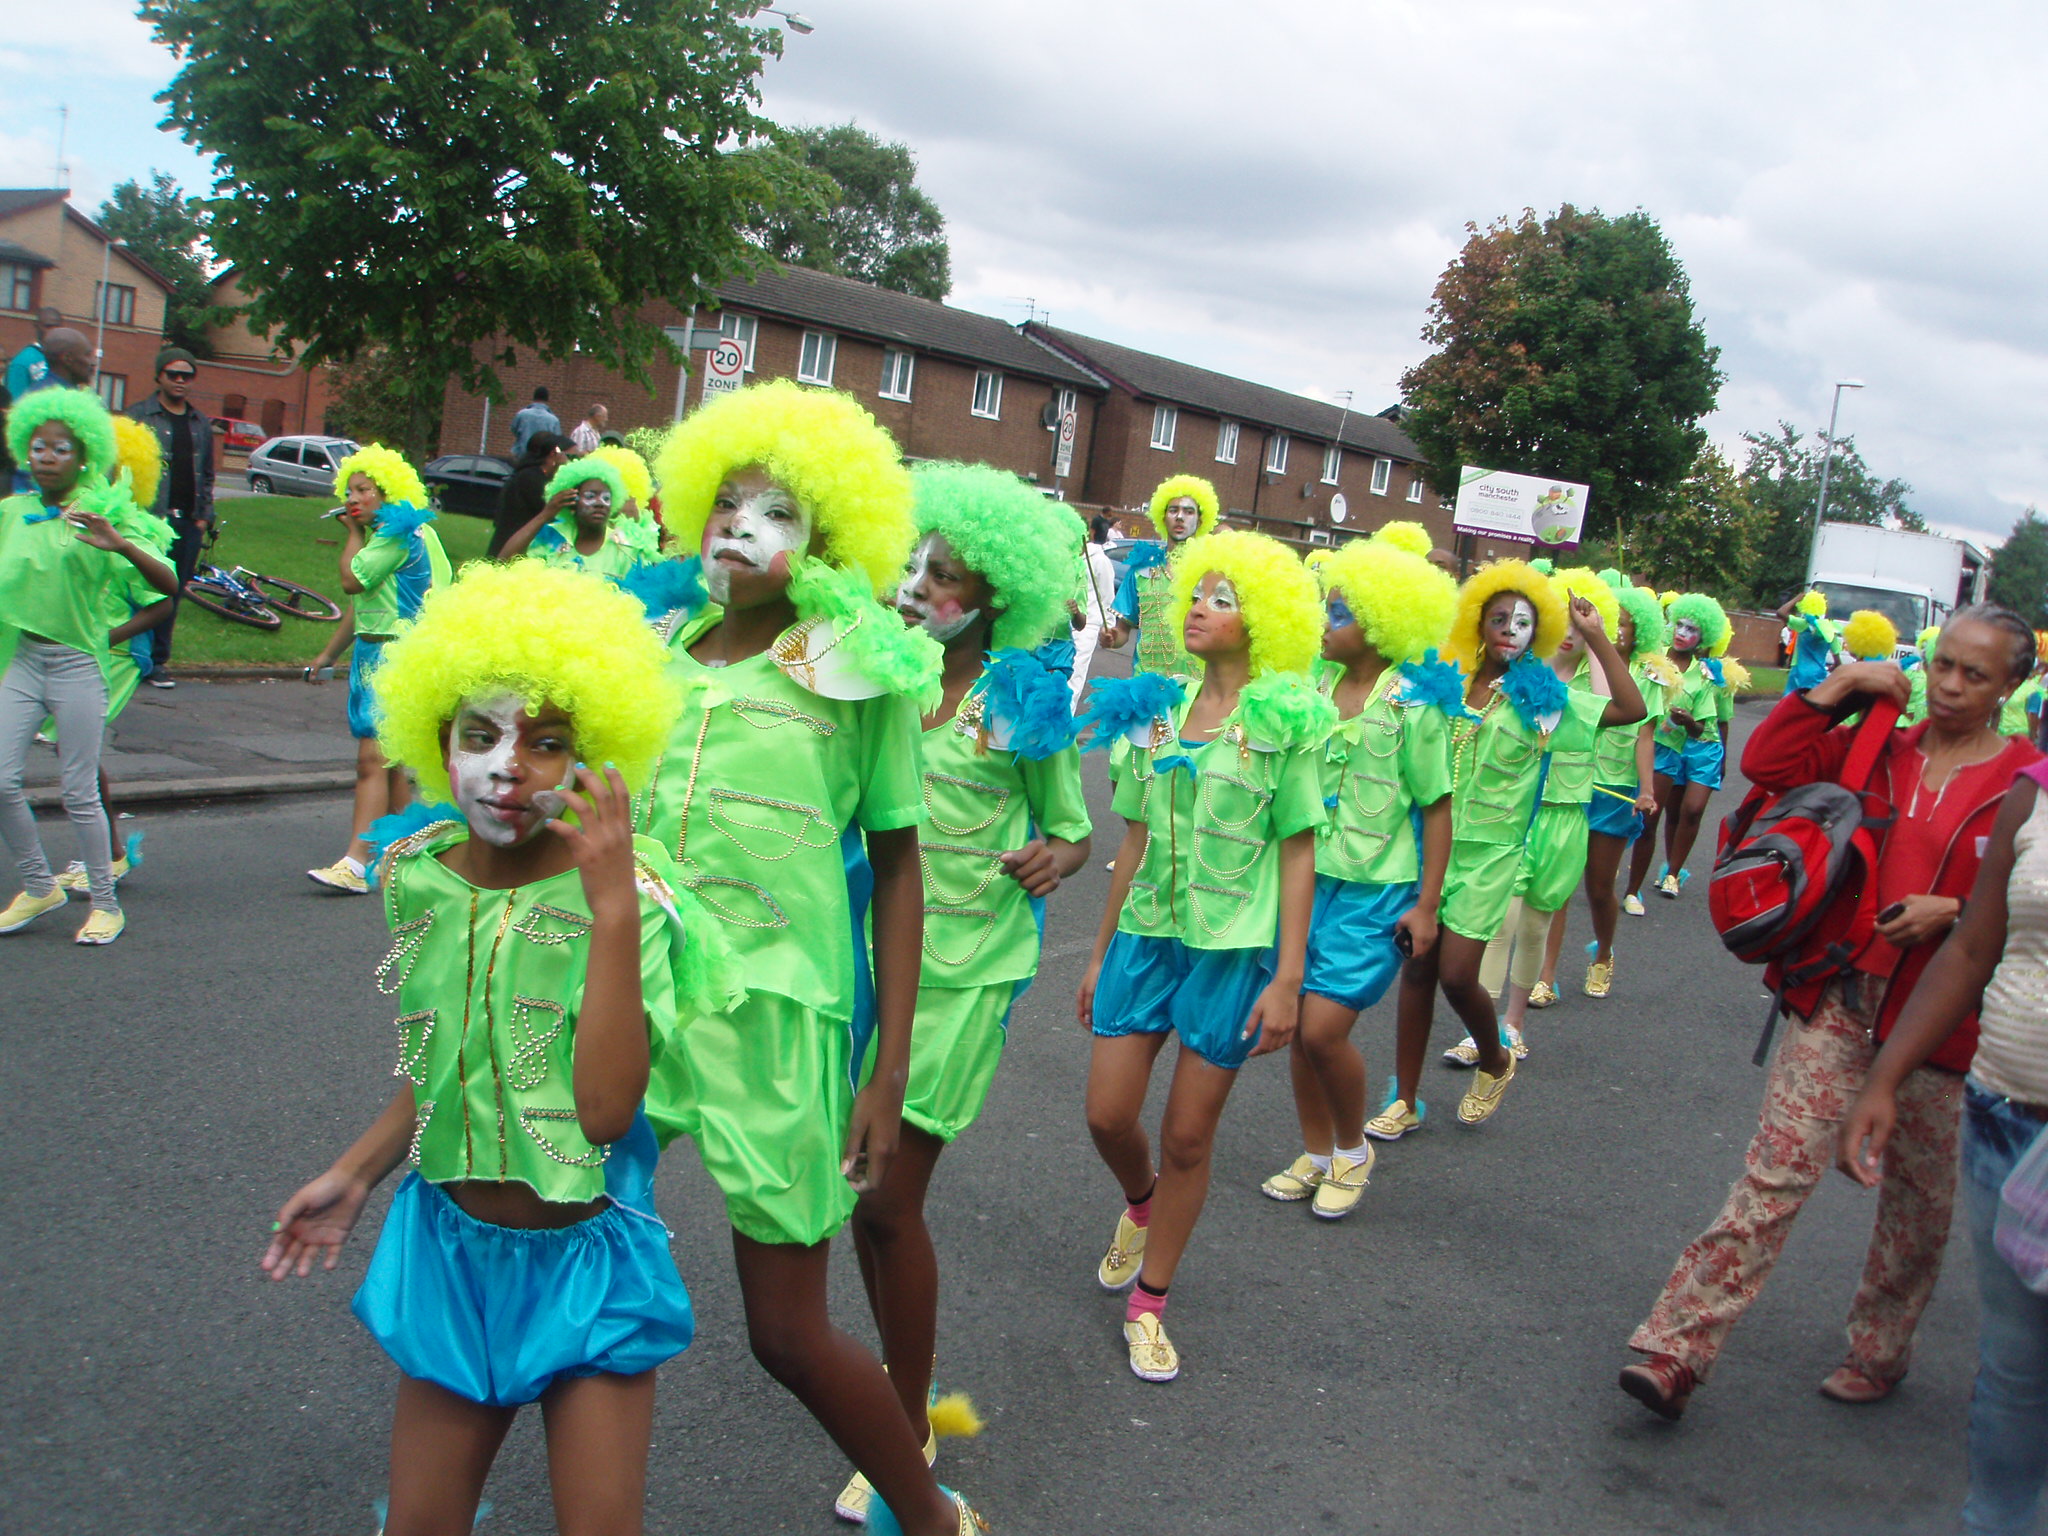 A troupe of young people dressed in green, yellow and blue walk along a road in Moss Side during the Carnival.